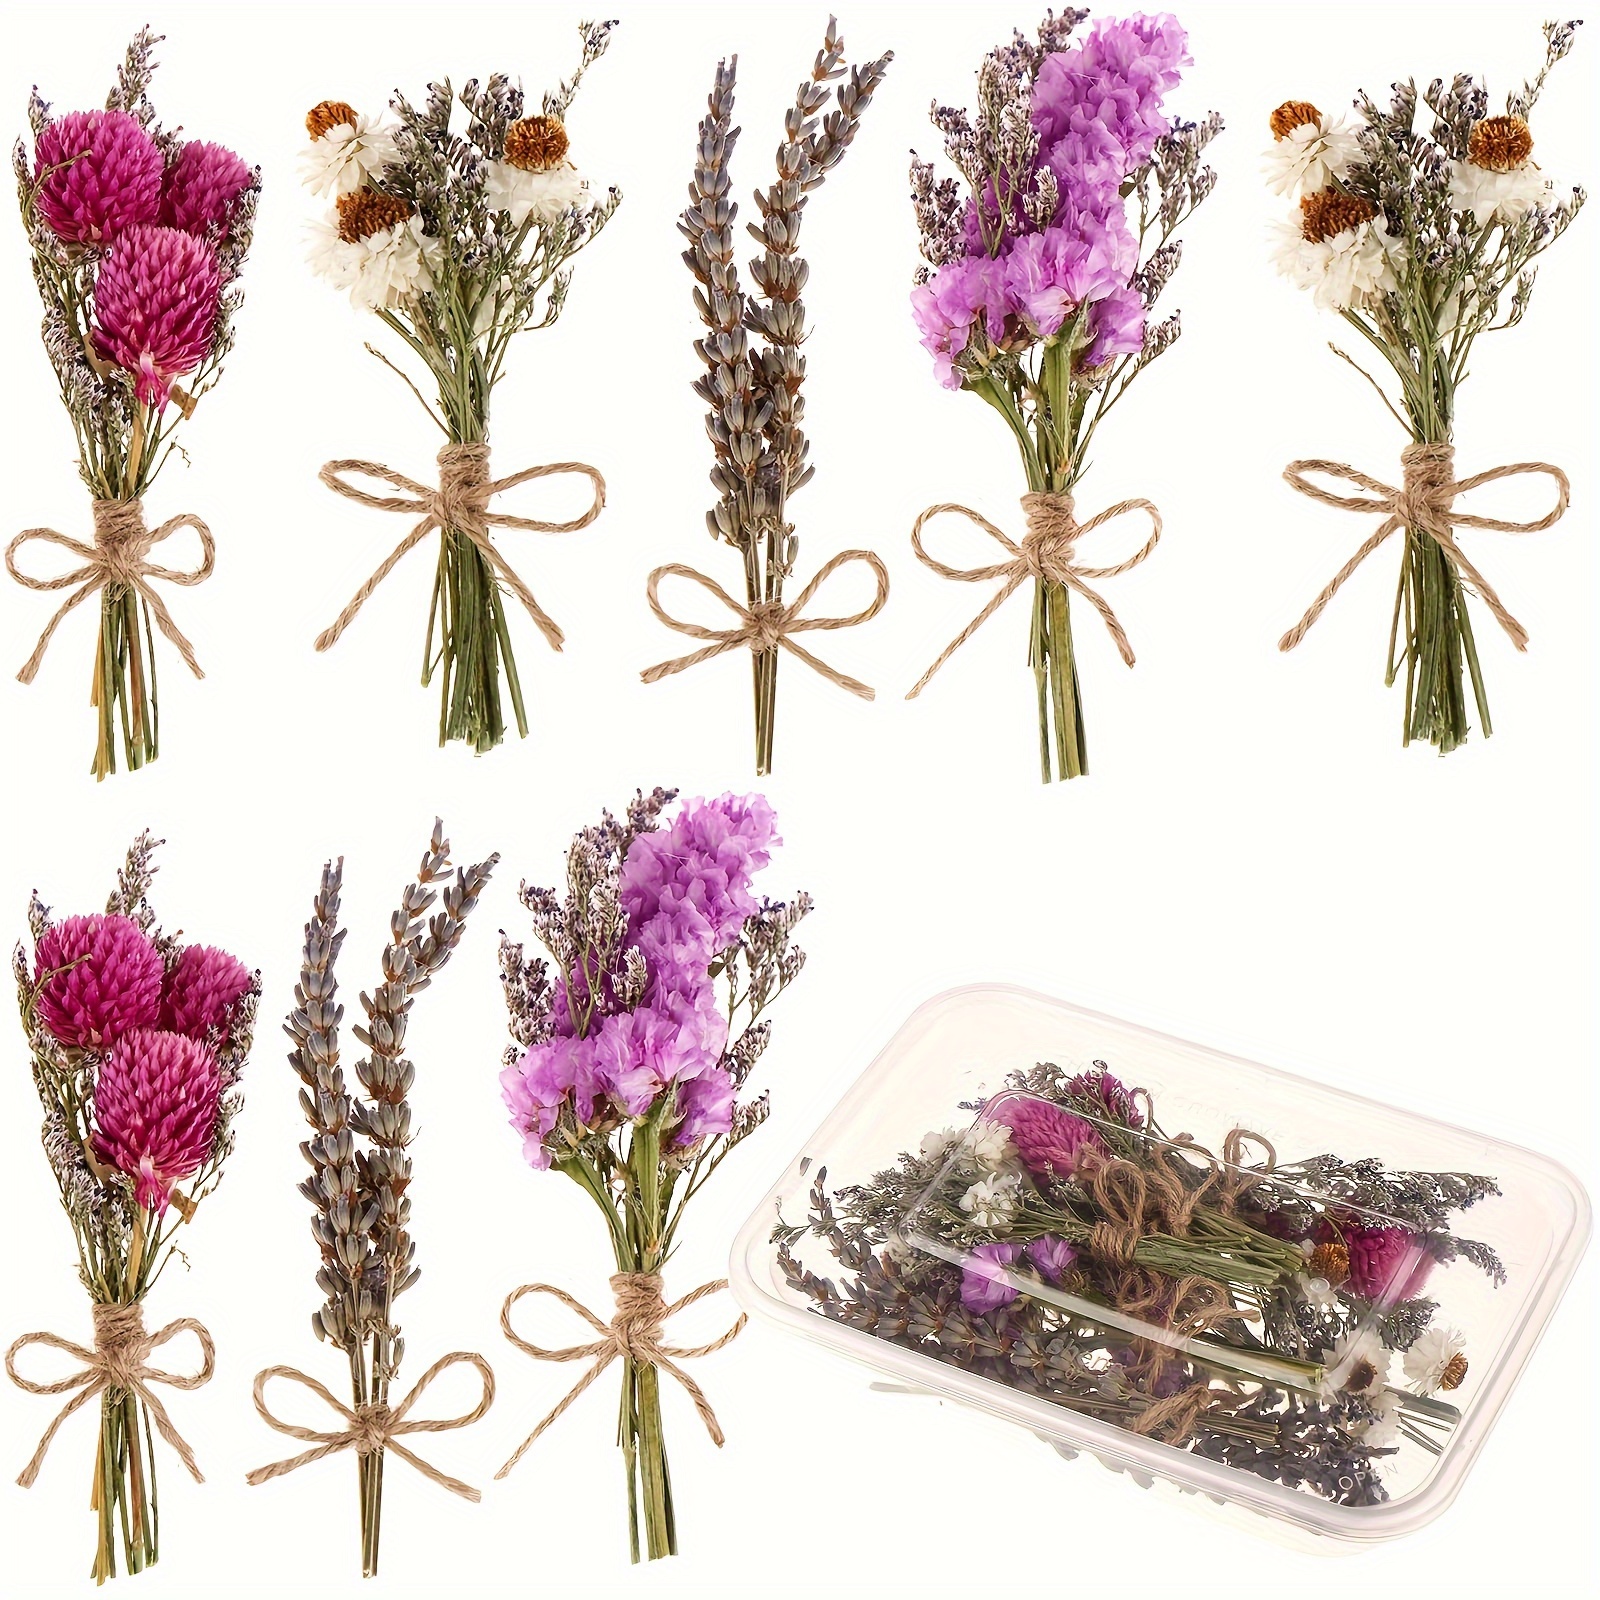 Hydrangea Artificial Flowers, Gypsophila Paniculata, Dried Flower Dry  Plants for Aromatherapy Candle, Premium Dried Pressed Leaves and Flowers